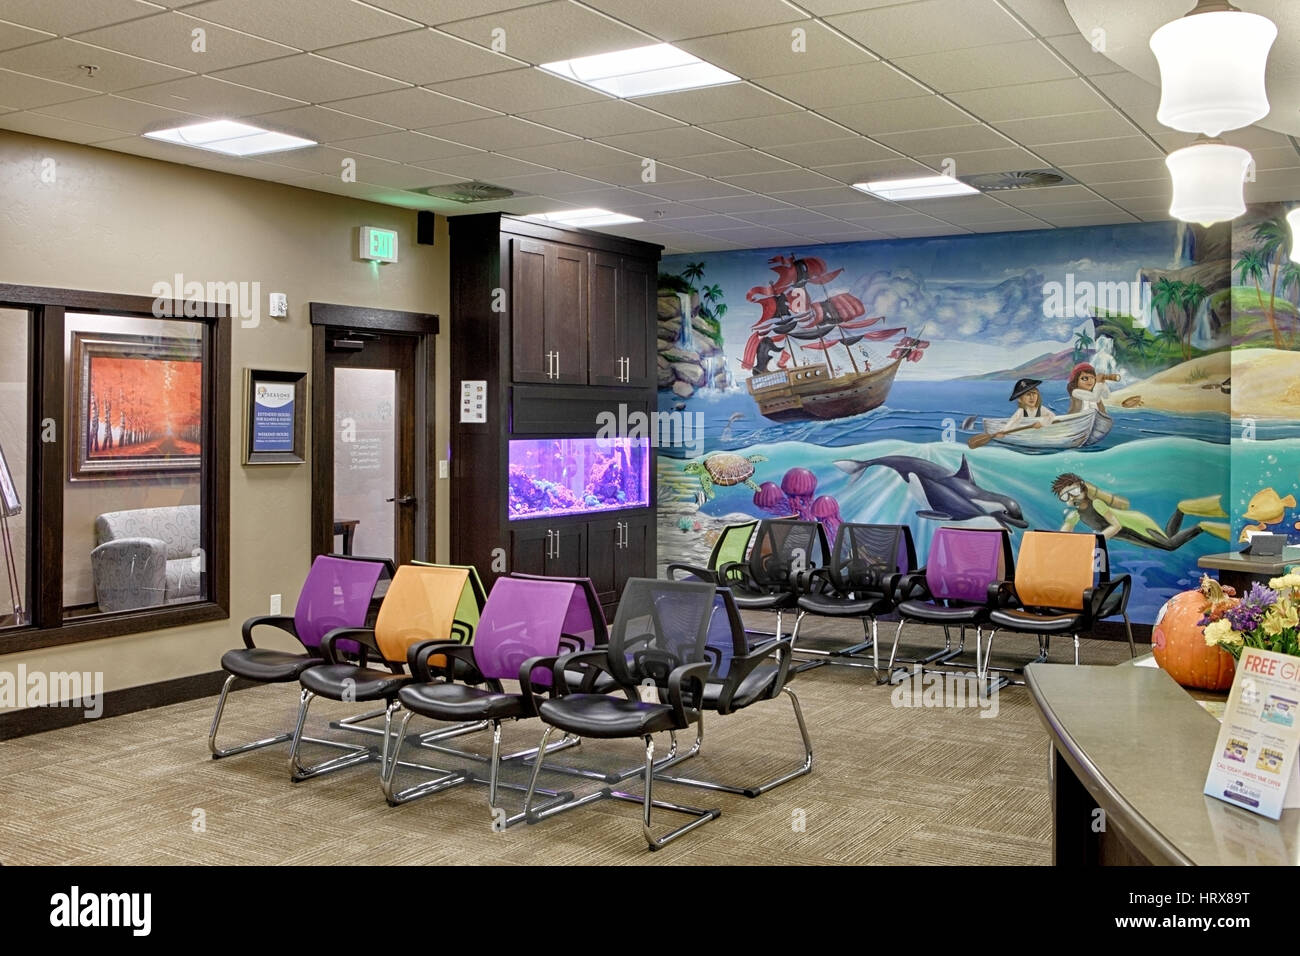 The waiting area of a modern pediatrician's office, decorated in a marine theme with an aquarium and murals. Stock Photo